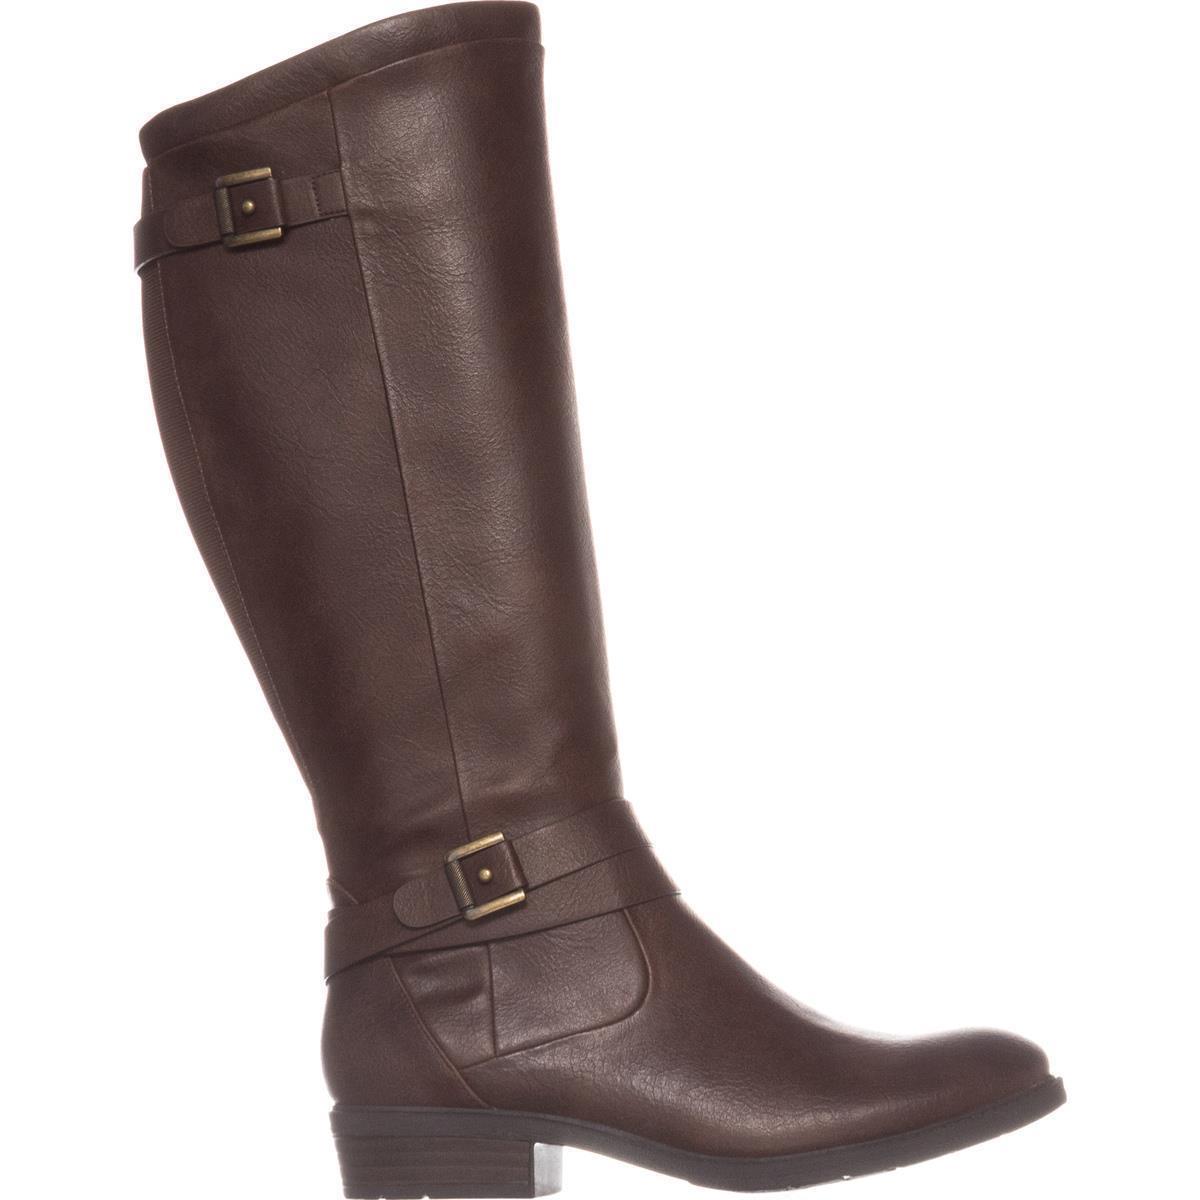 Bare Traps Womens Boots in Brown Color, Size 6 OJG | eBay